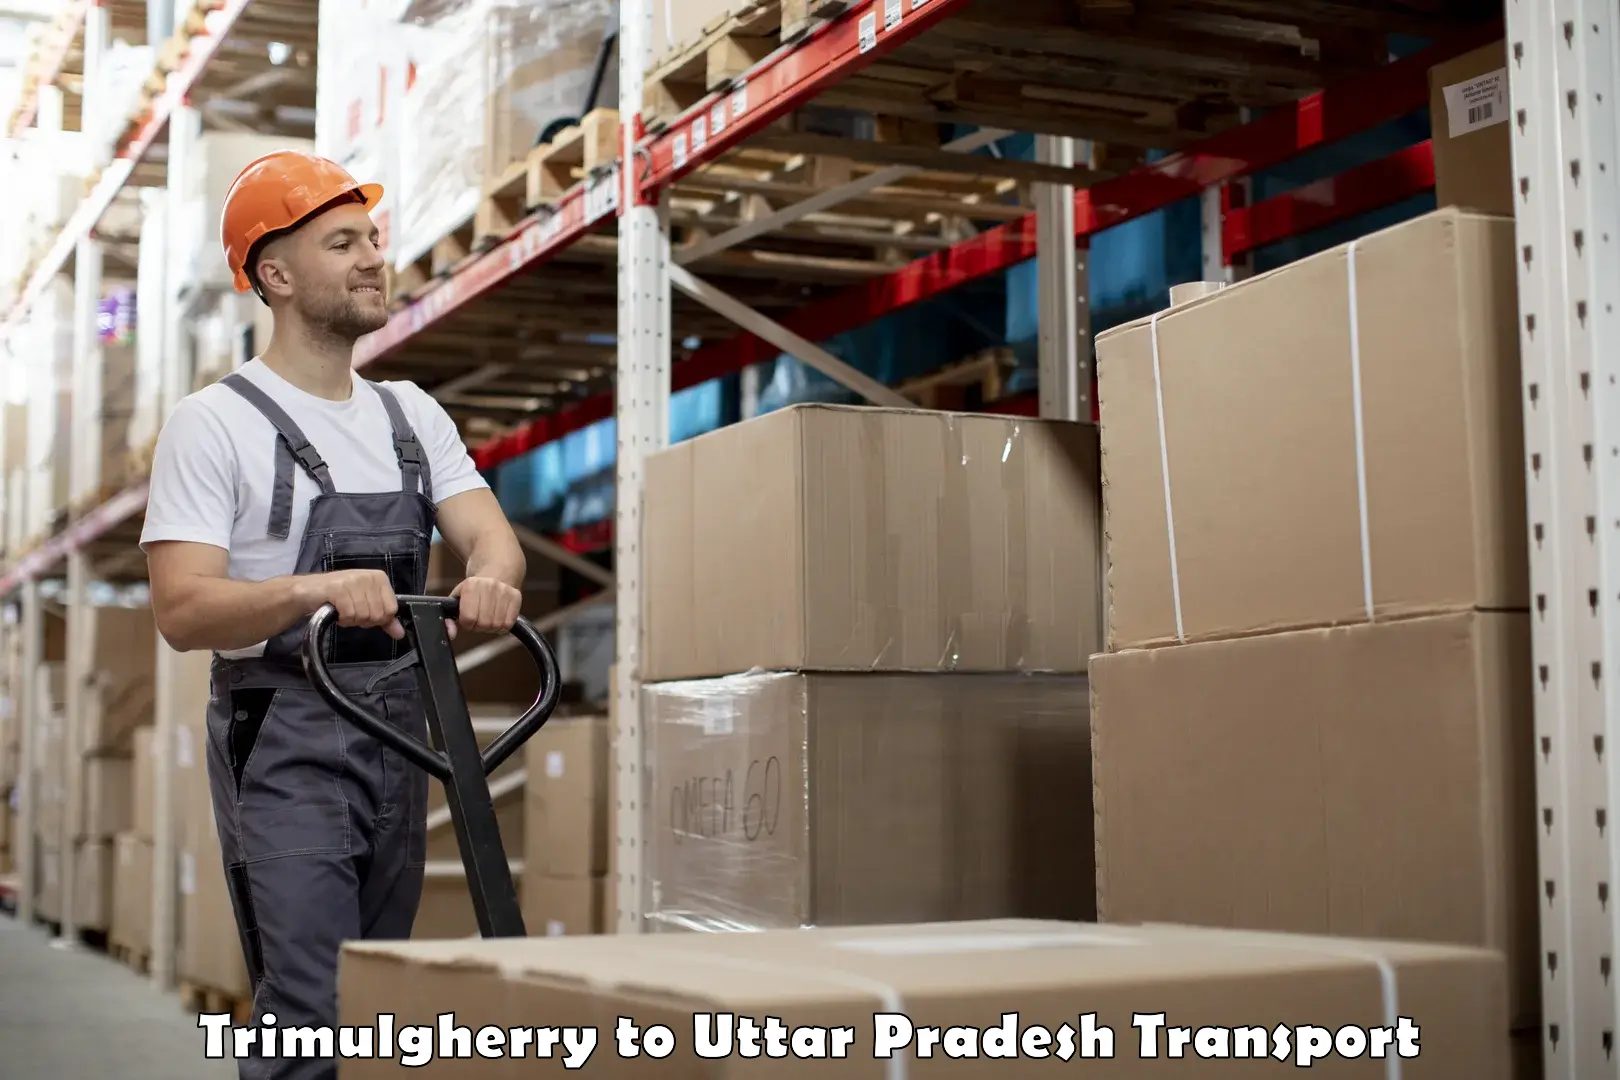 Goods delivery service Trimulgherry to Dariyabad